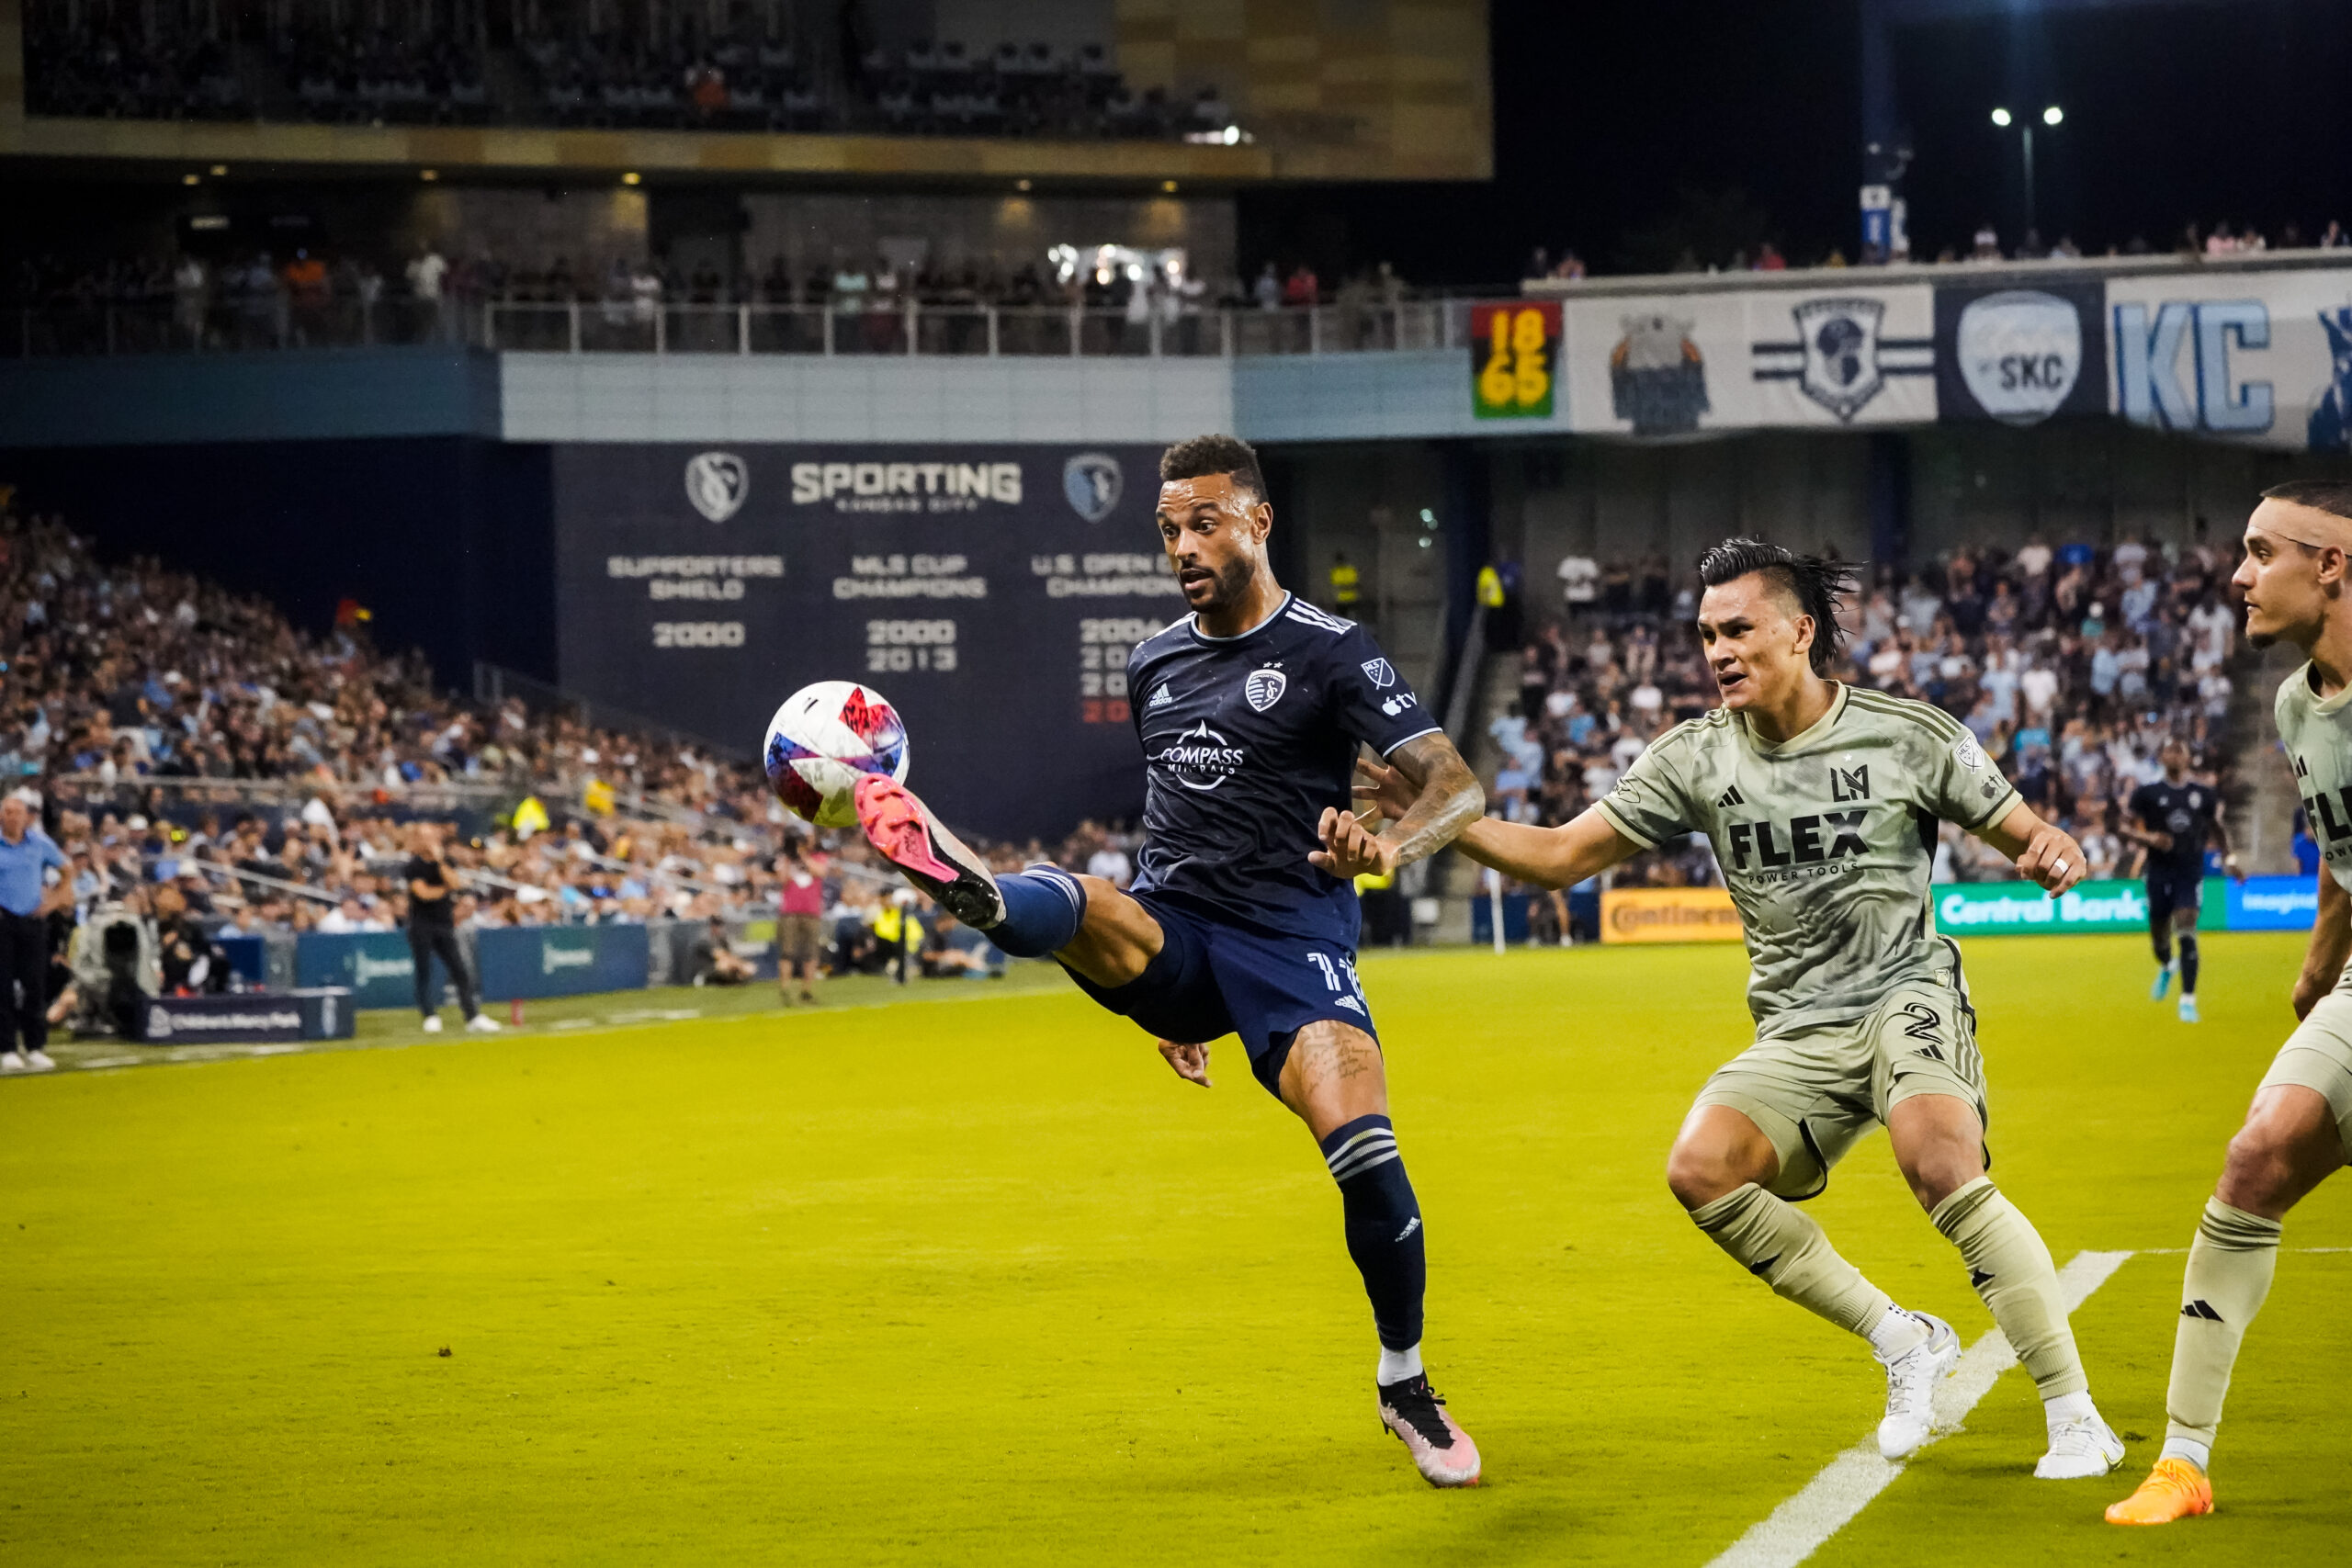 Sporting KC's Khiry Shelton fends of LAFC defender